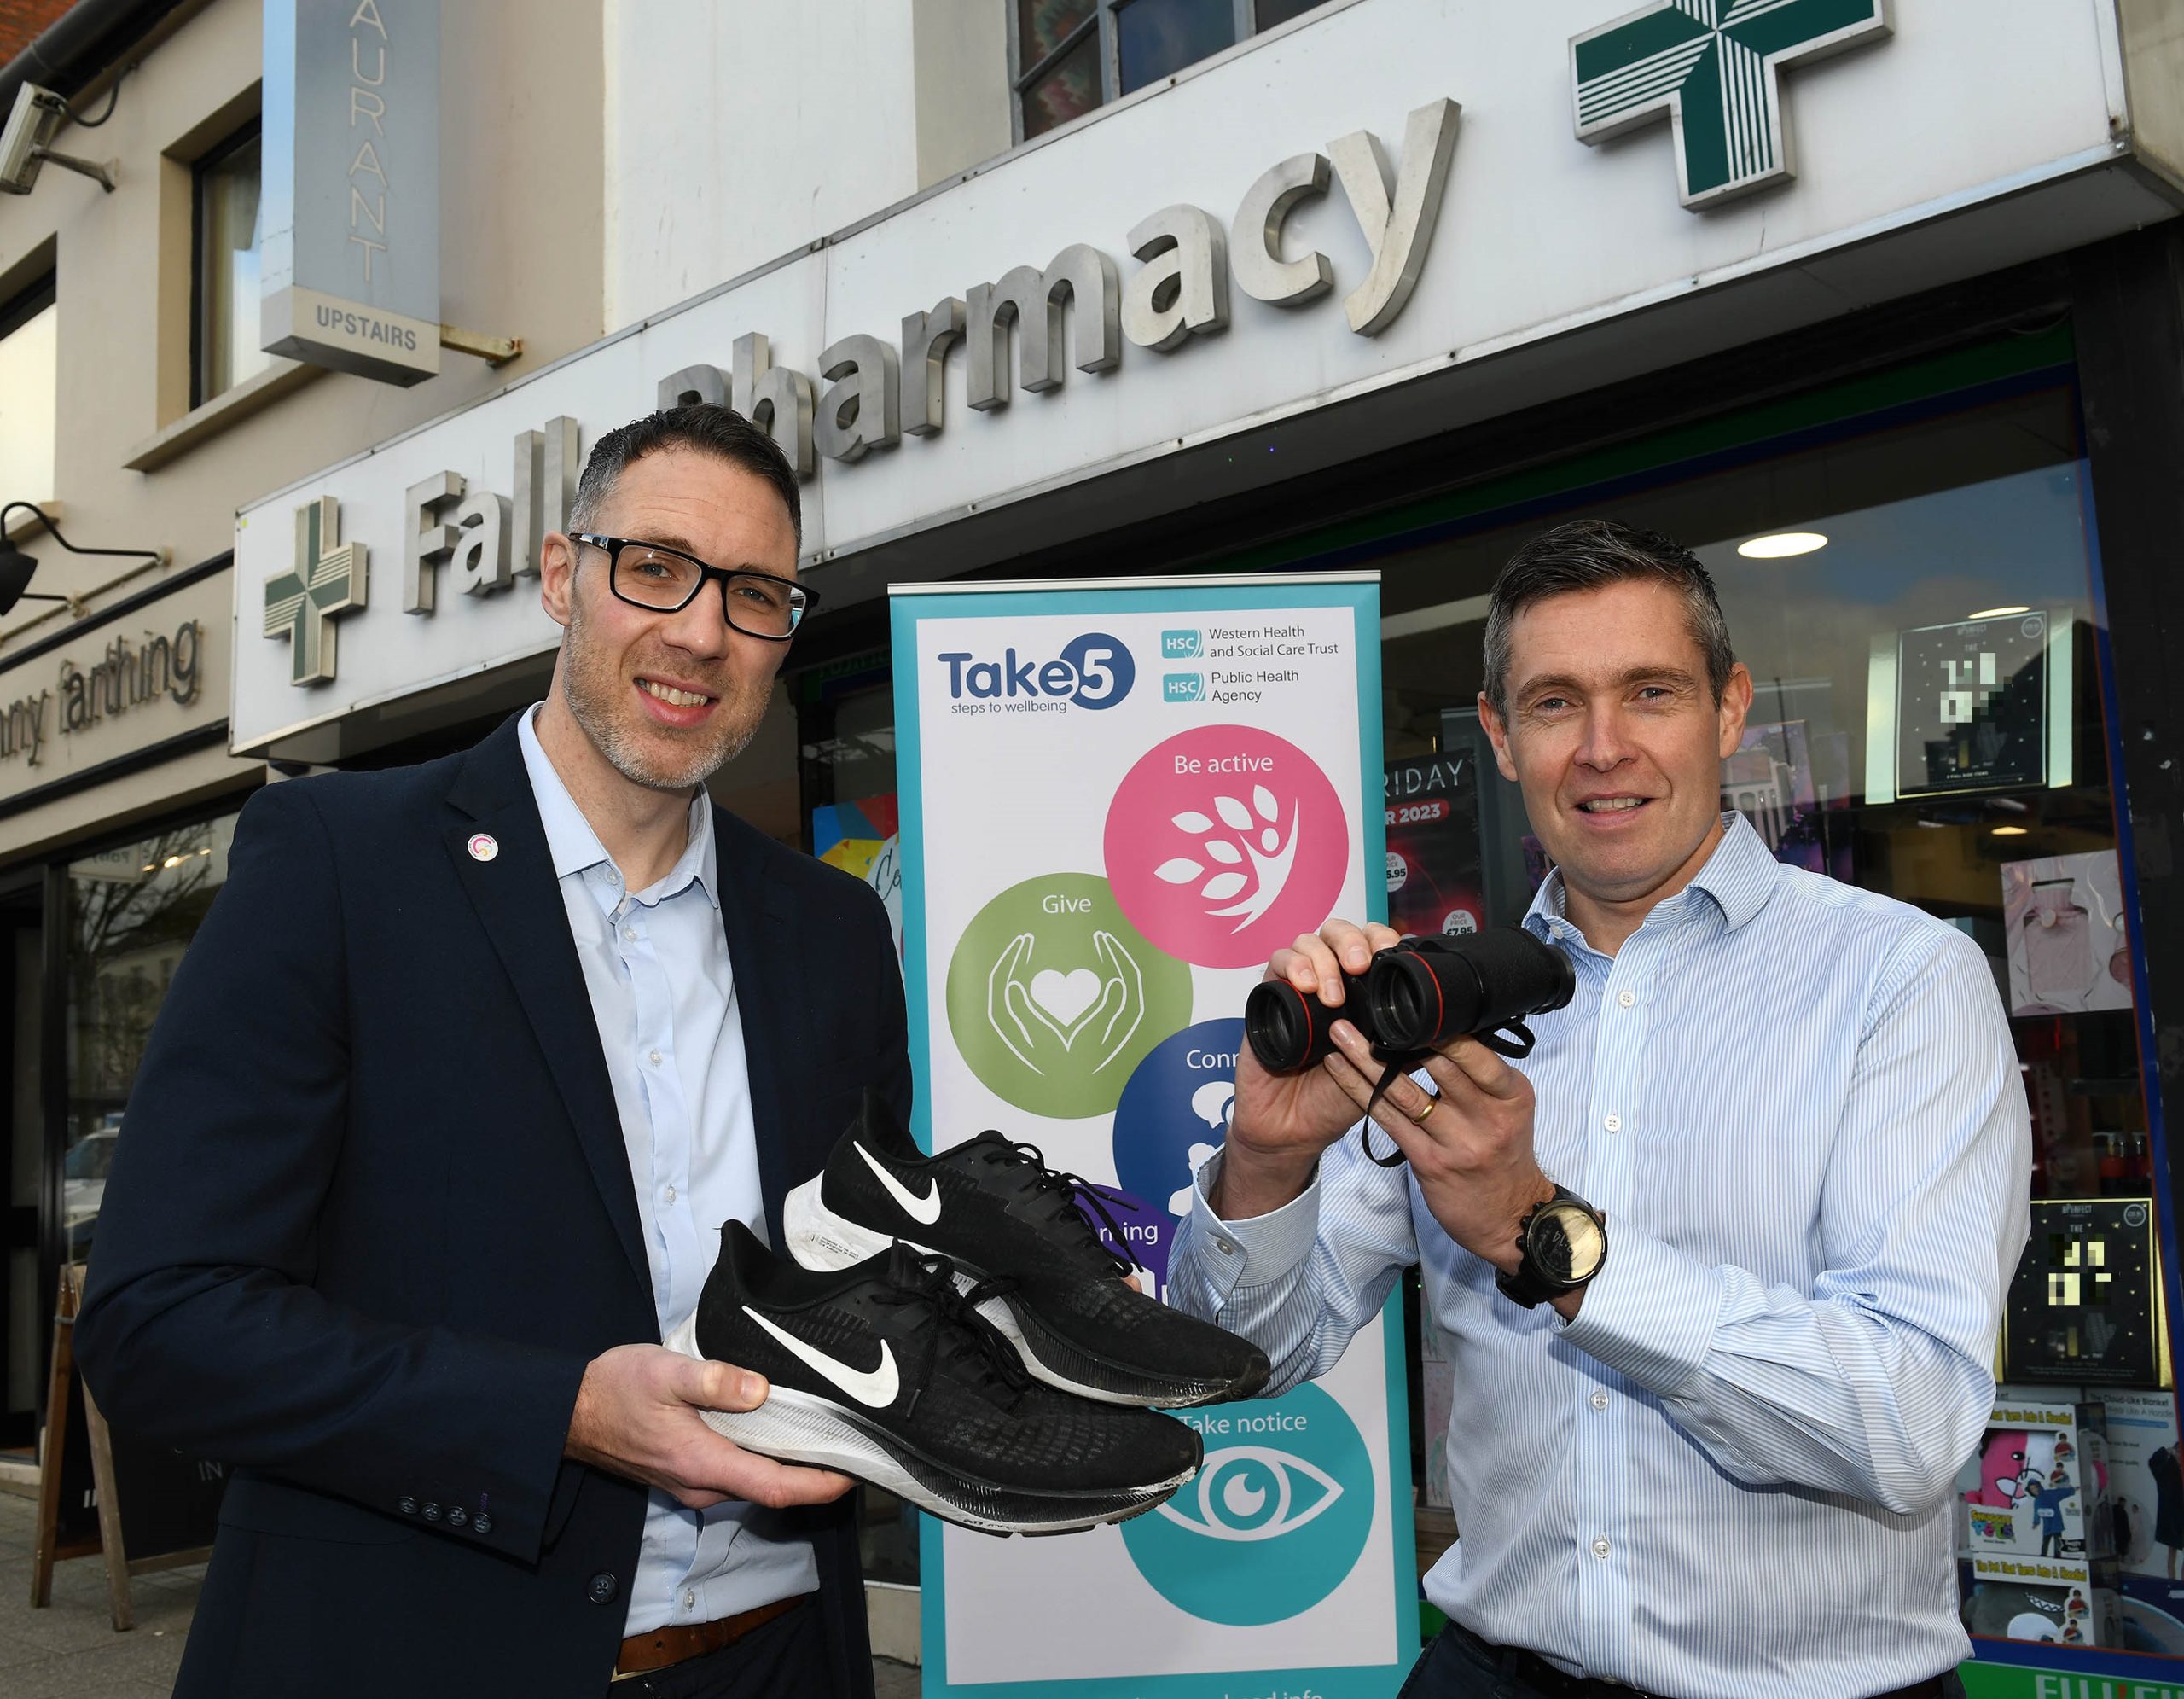 Community Pharmacies encourage people to ‘take 5 steps to wellbeing’ this winter